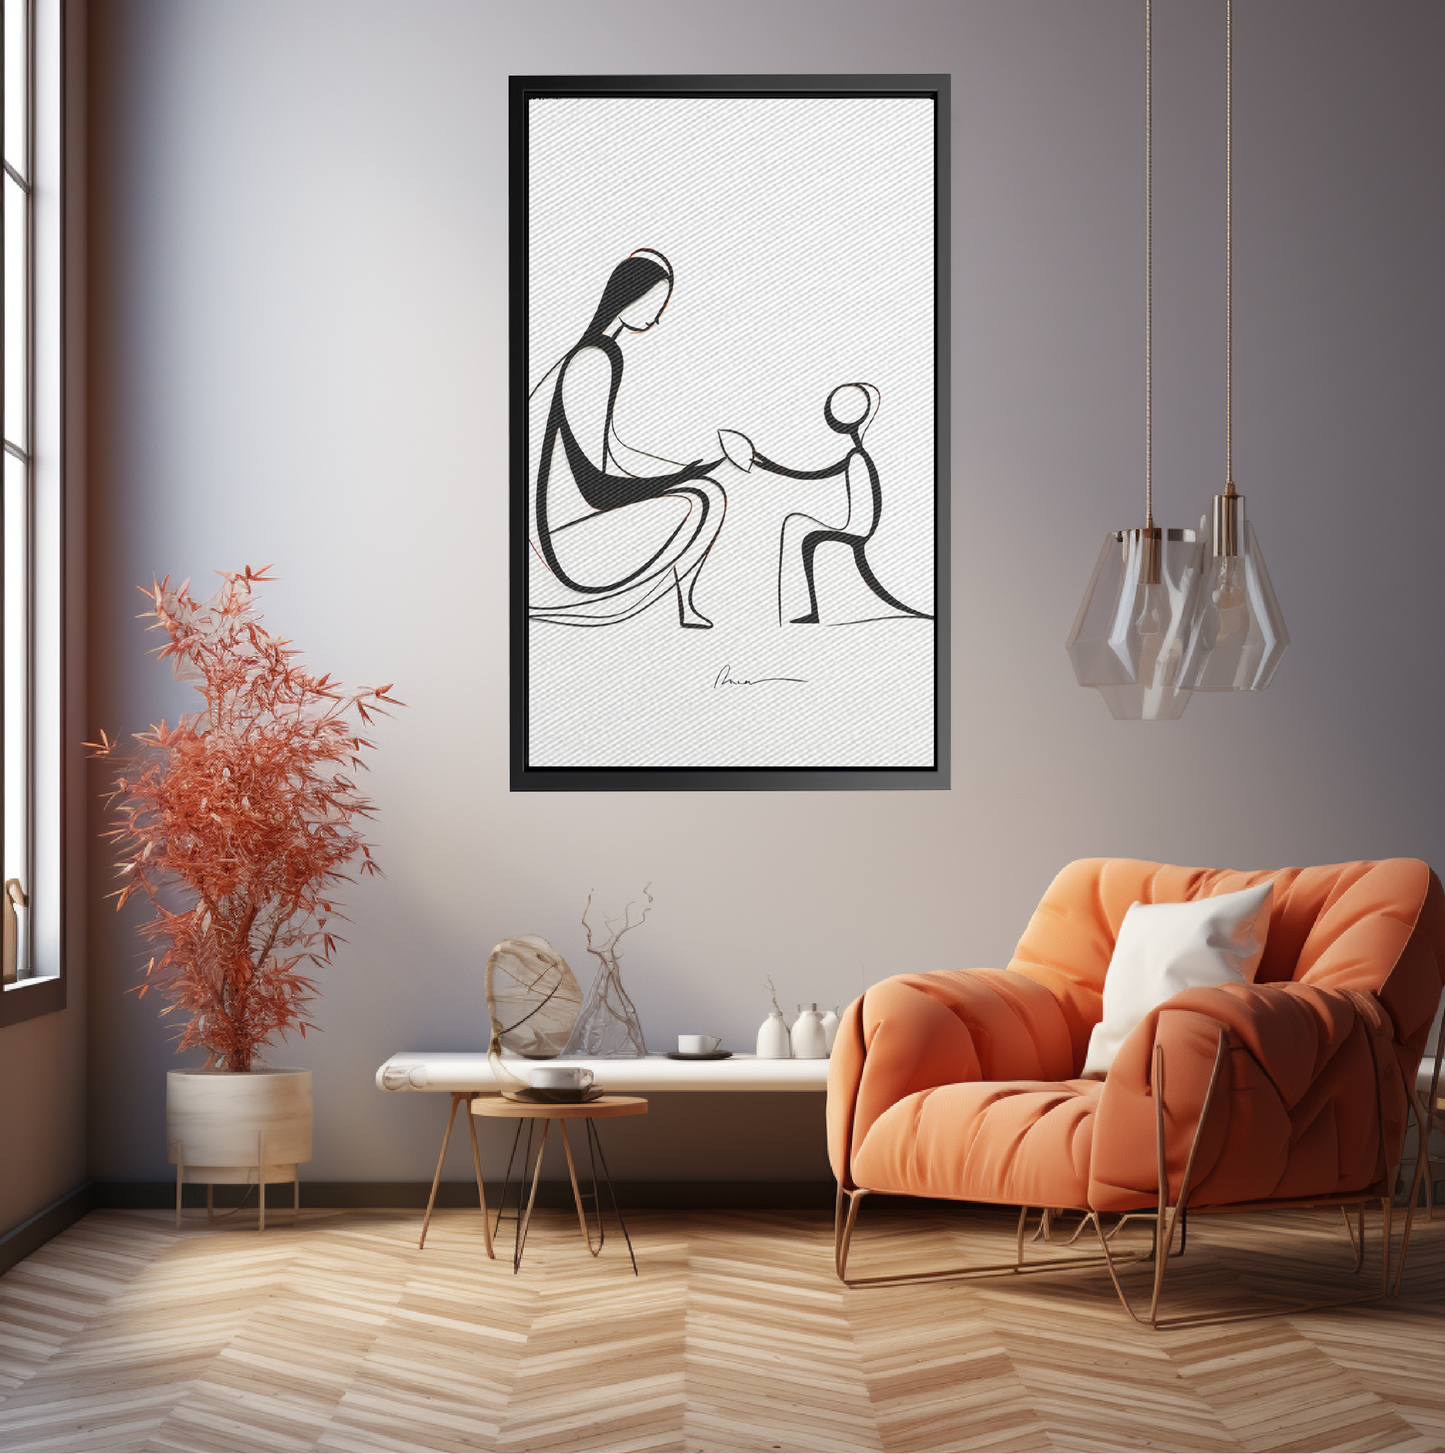 Man and Child in Stylized Line Work